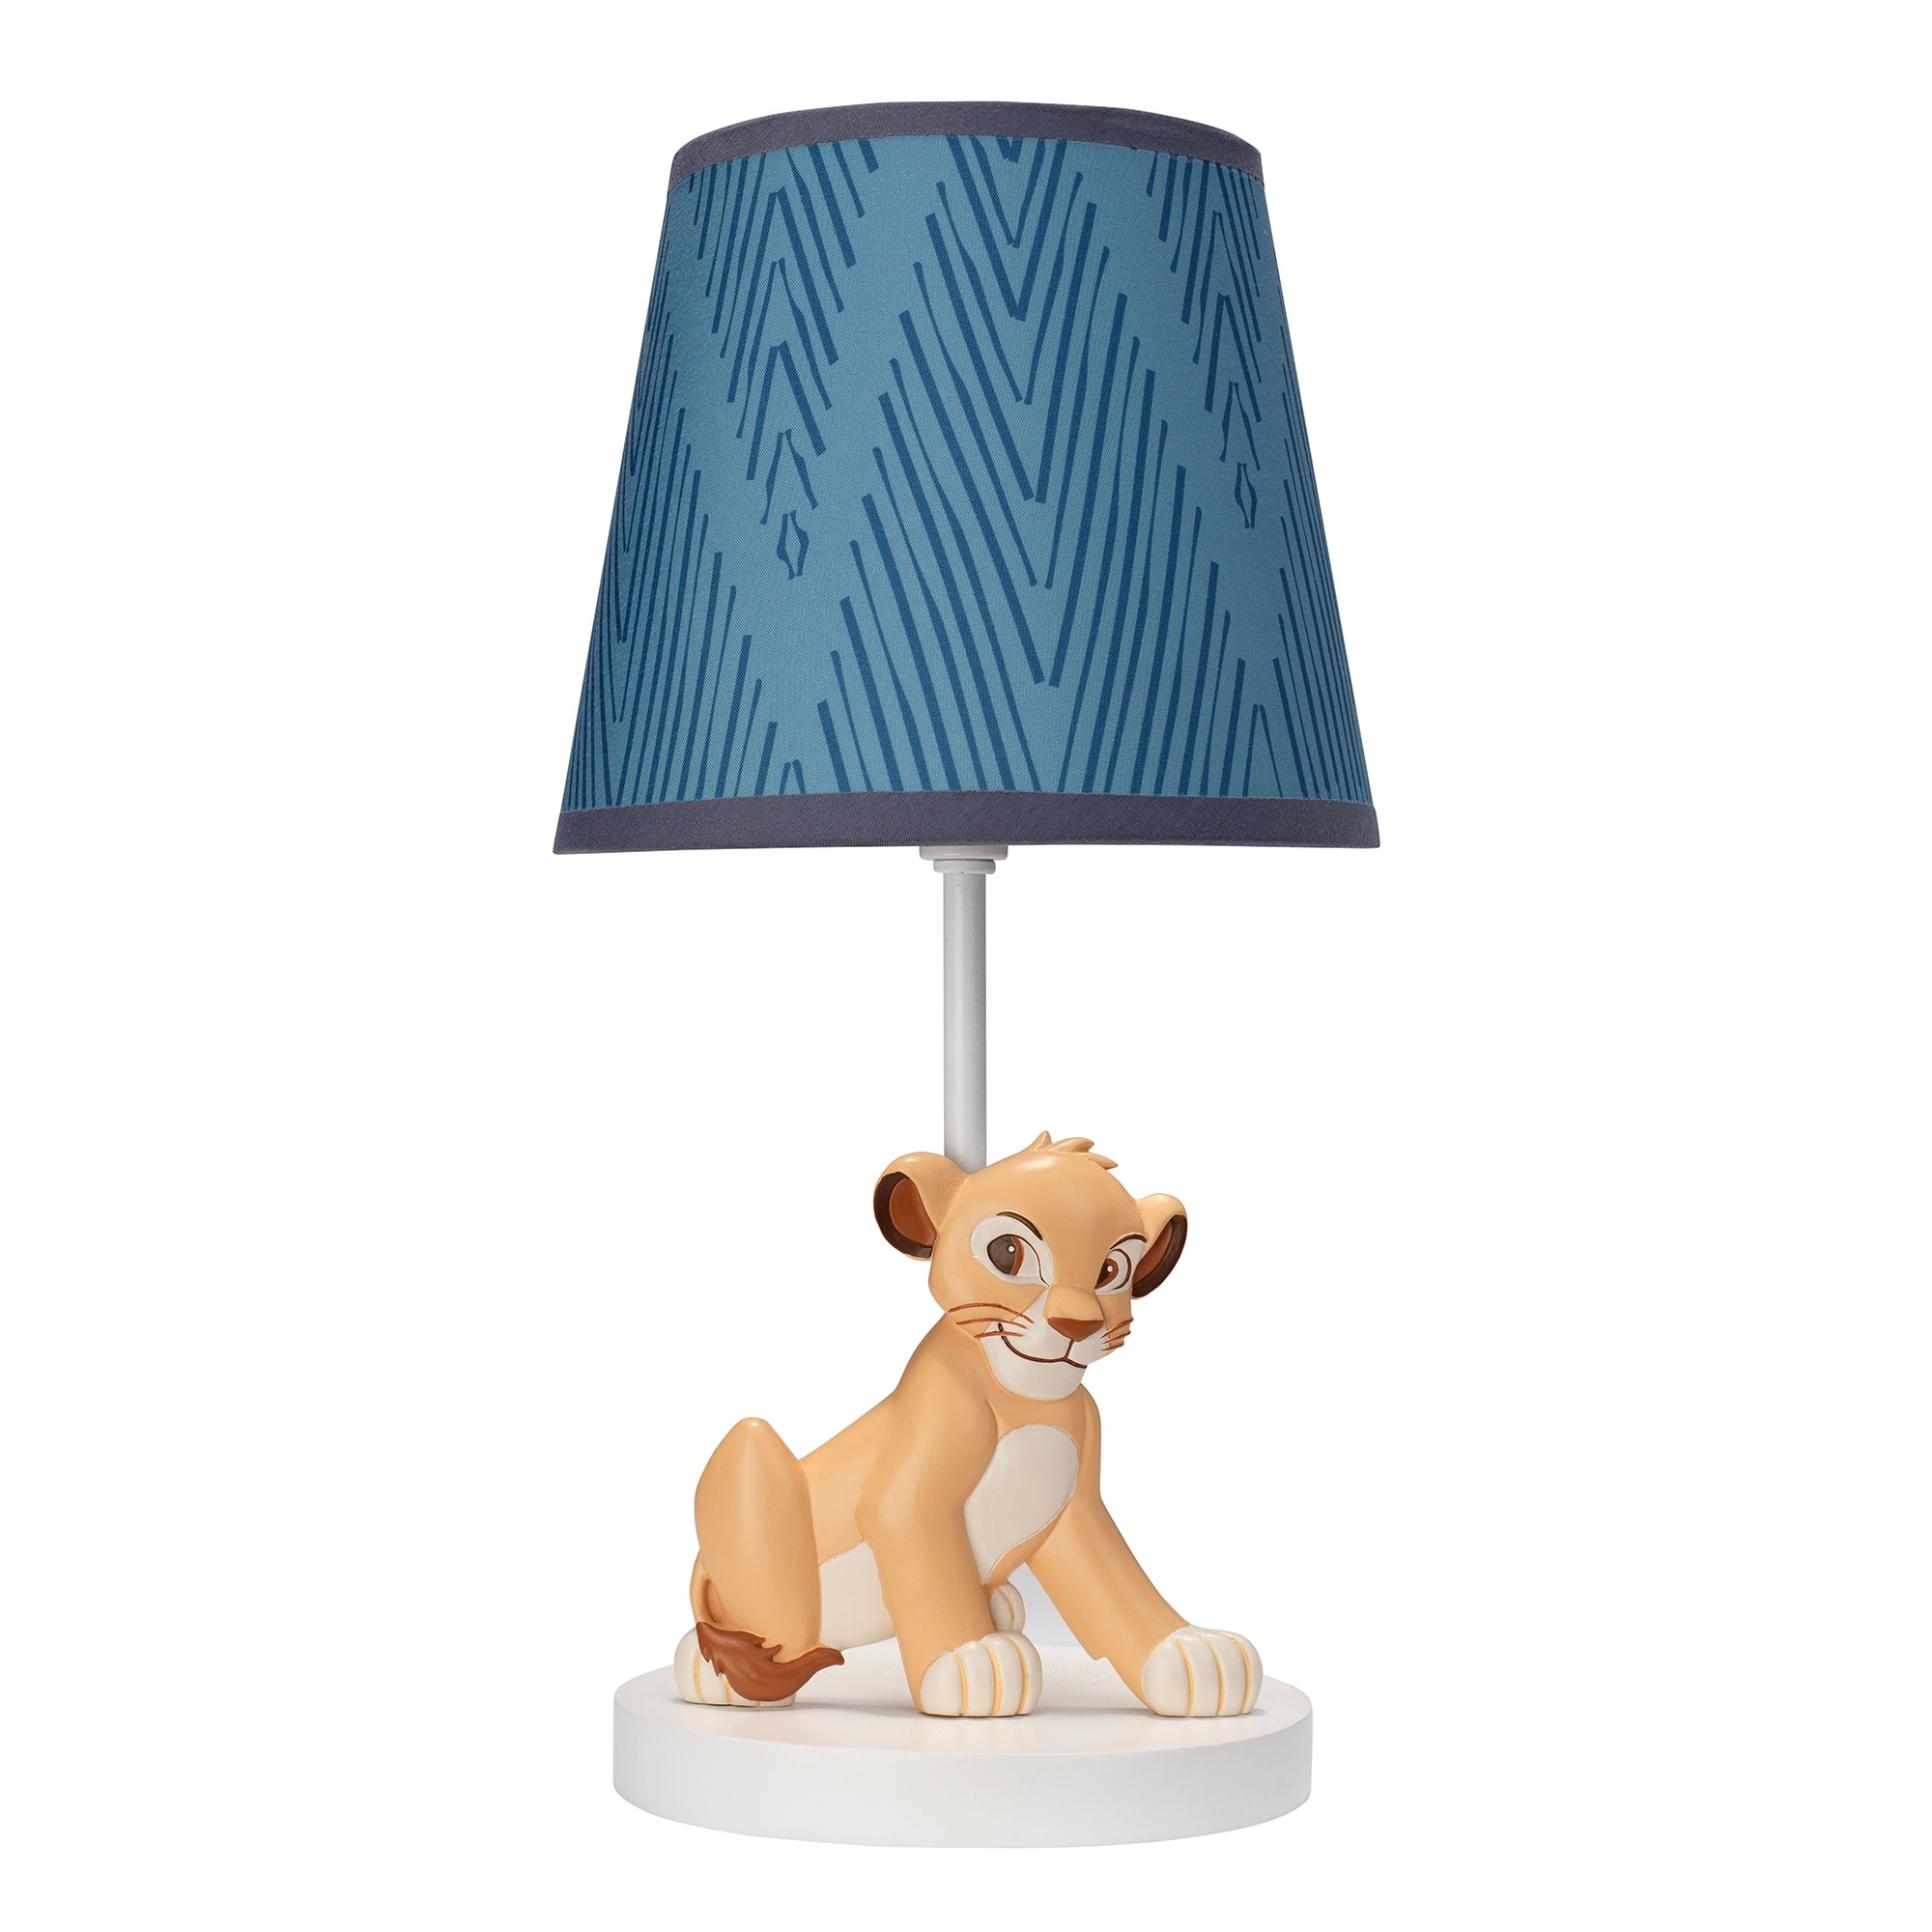 lamp shade for baby boy room